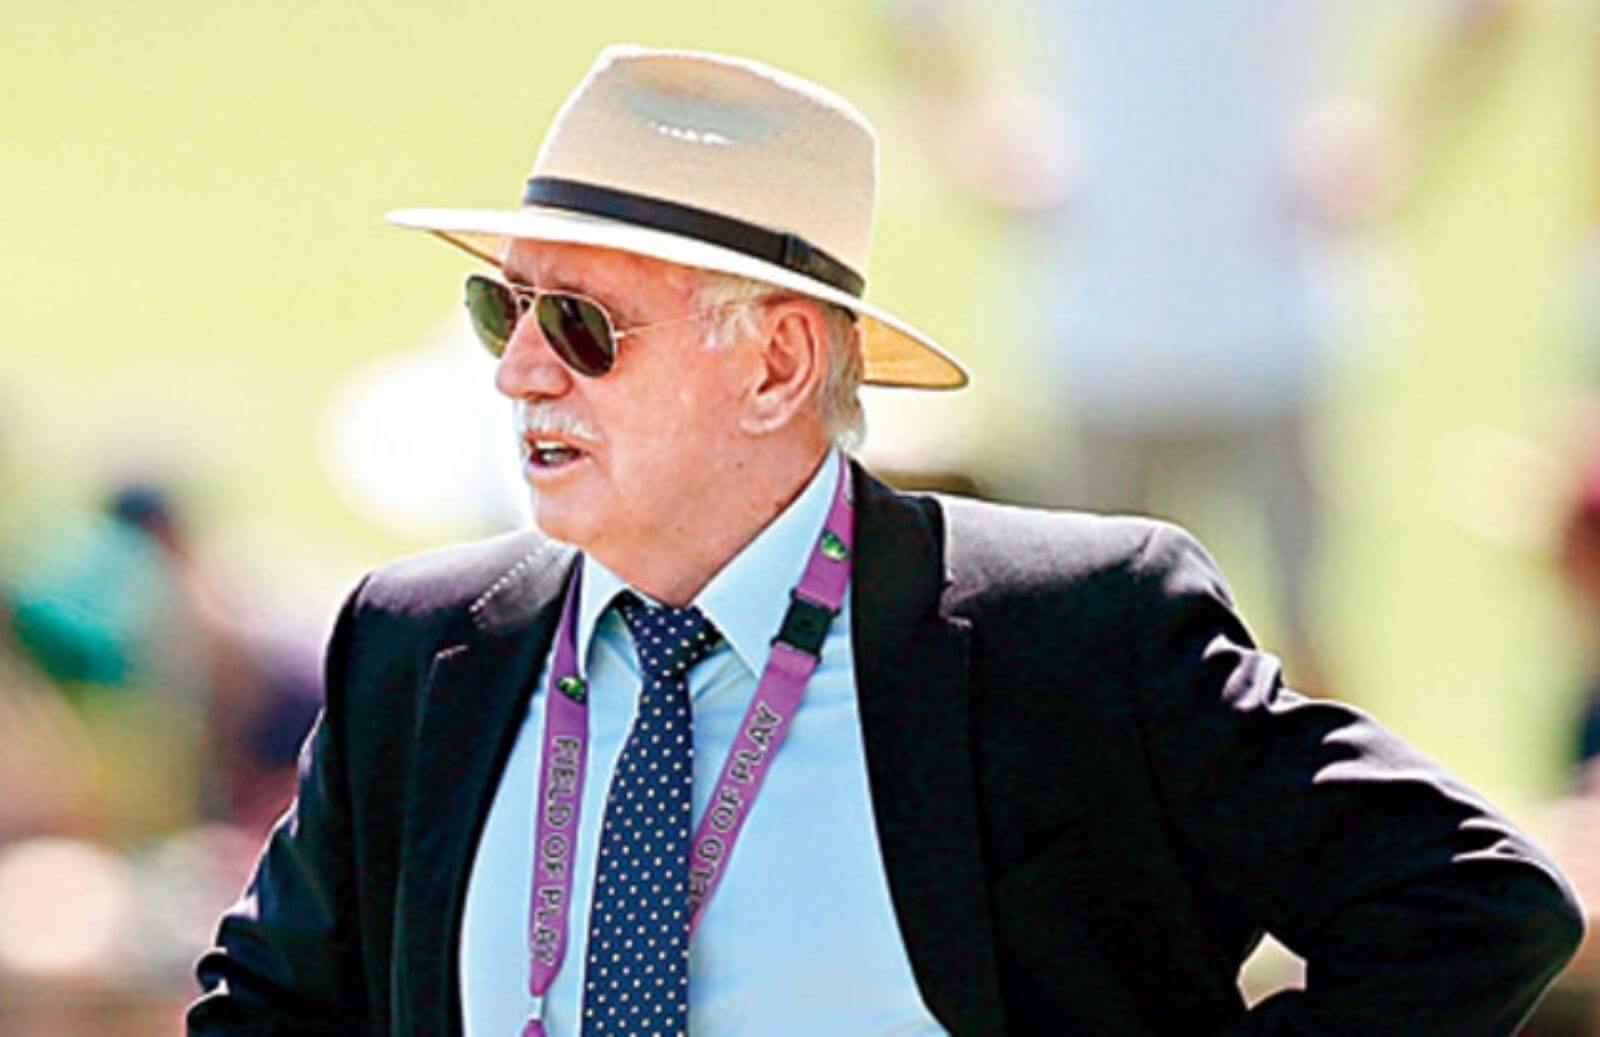 If Indian Pacers Bowl Short At Steve Smith Then They Are Playing Into His Hands: Ian Chappell